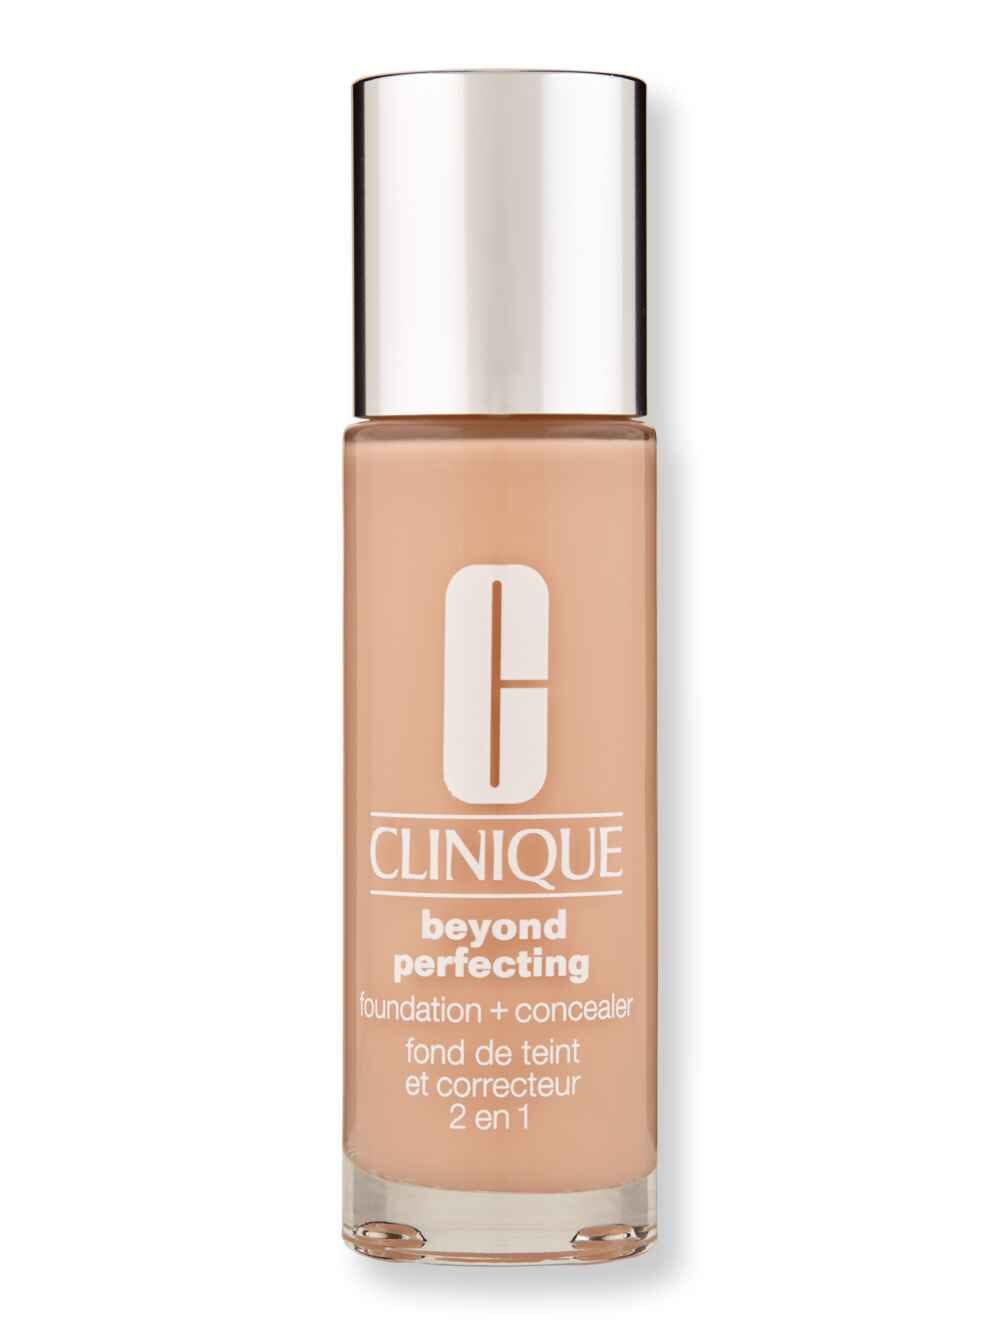 Clinique Clinique Beyond Perfecting Foundation + Concealer 30 mlAlabaster Tinted Moisturizers & Foundations 